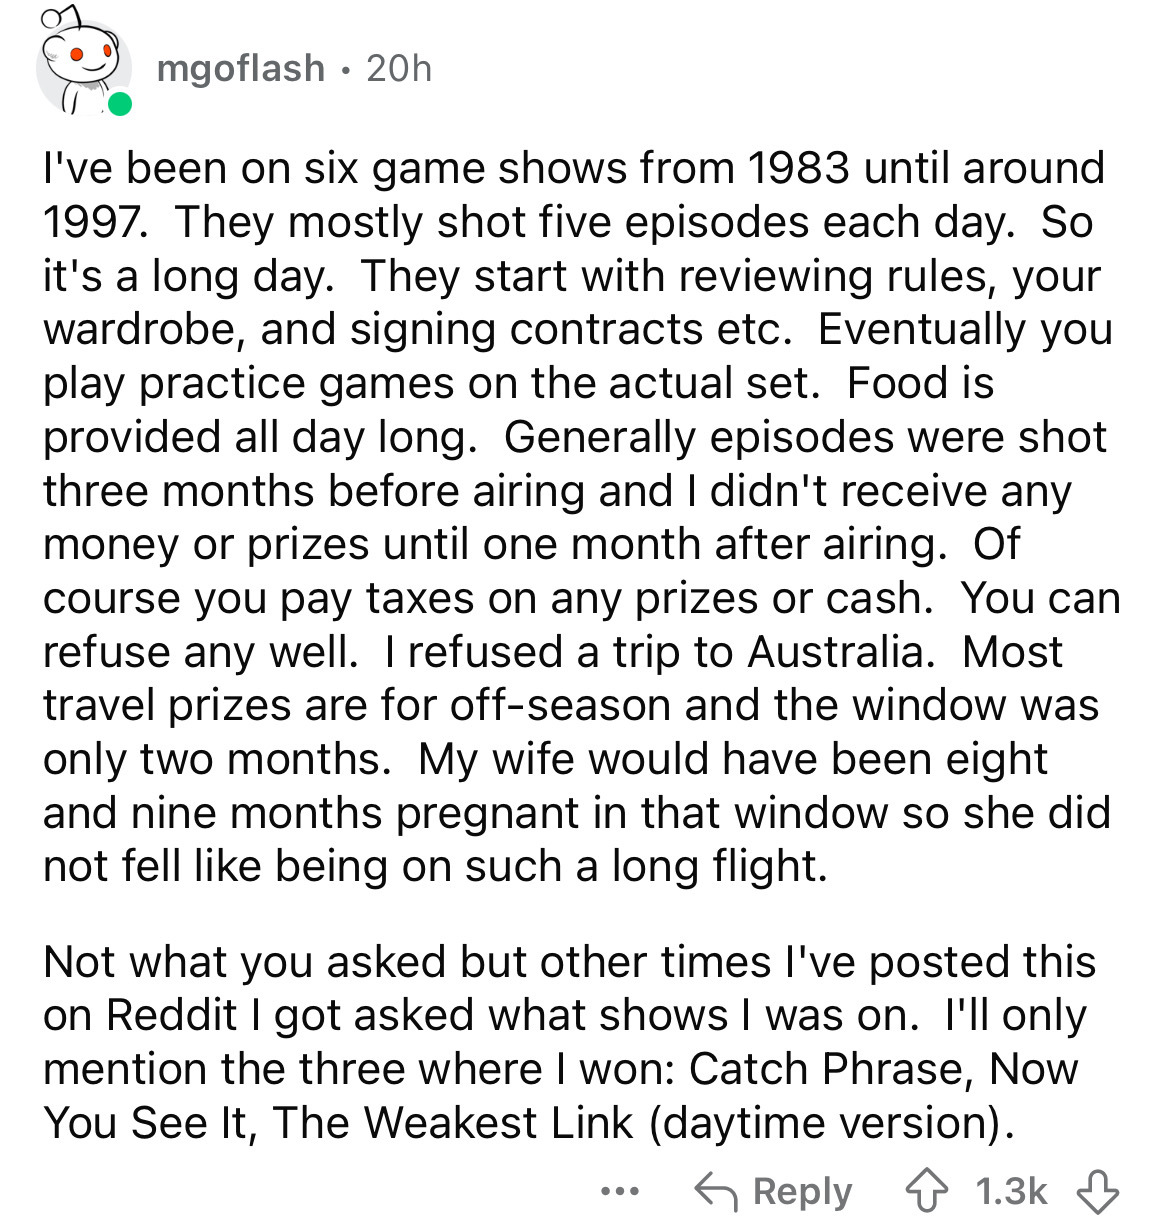 document - mgoflash 20h I've been on six game shows from 1983 until around 1997. They mostly shot five episodes each day. So it's a long day. They start with reviewing rules, your wardrobe, and signing contracts etc. Eventually you play practice games on 